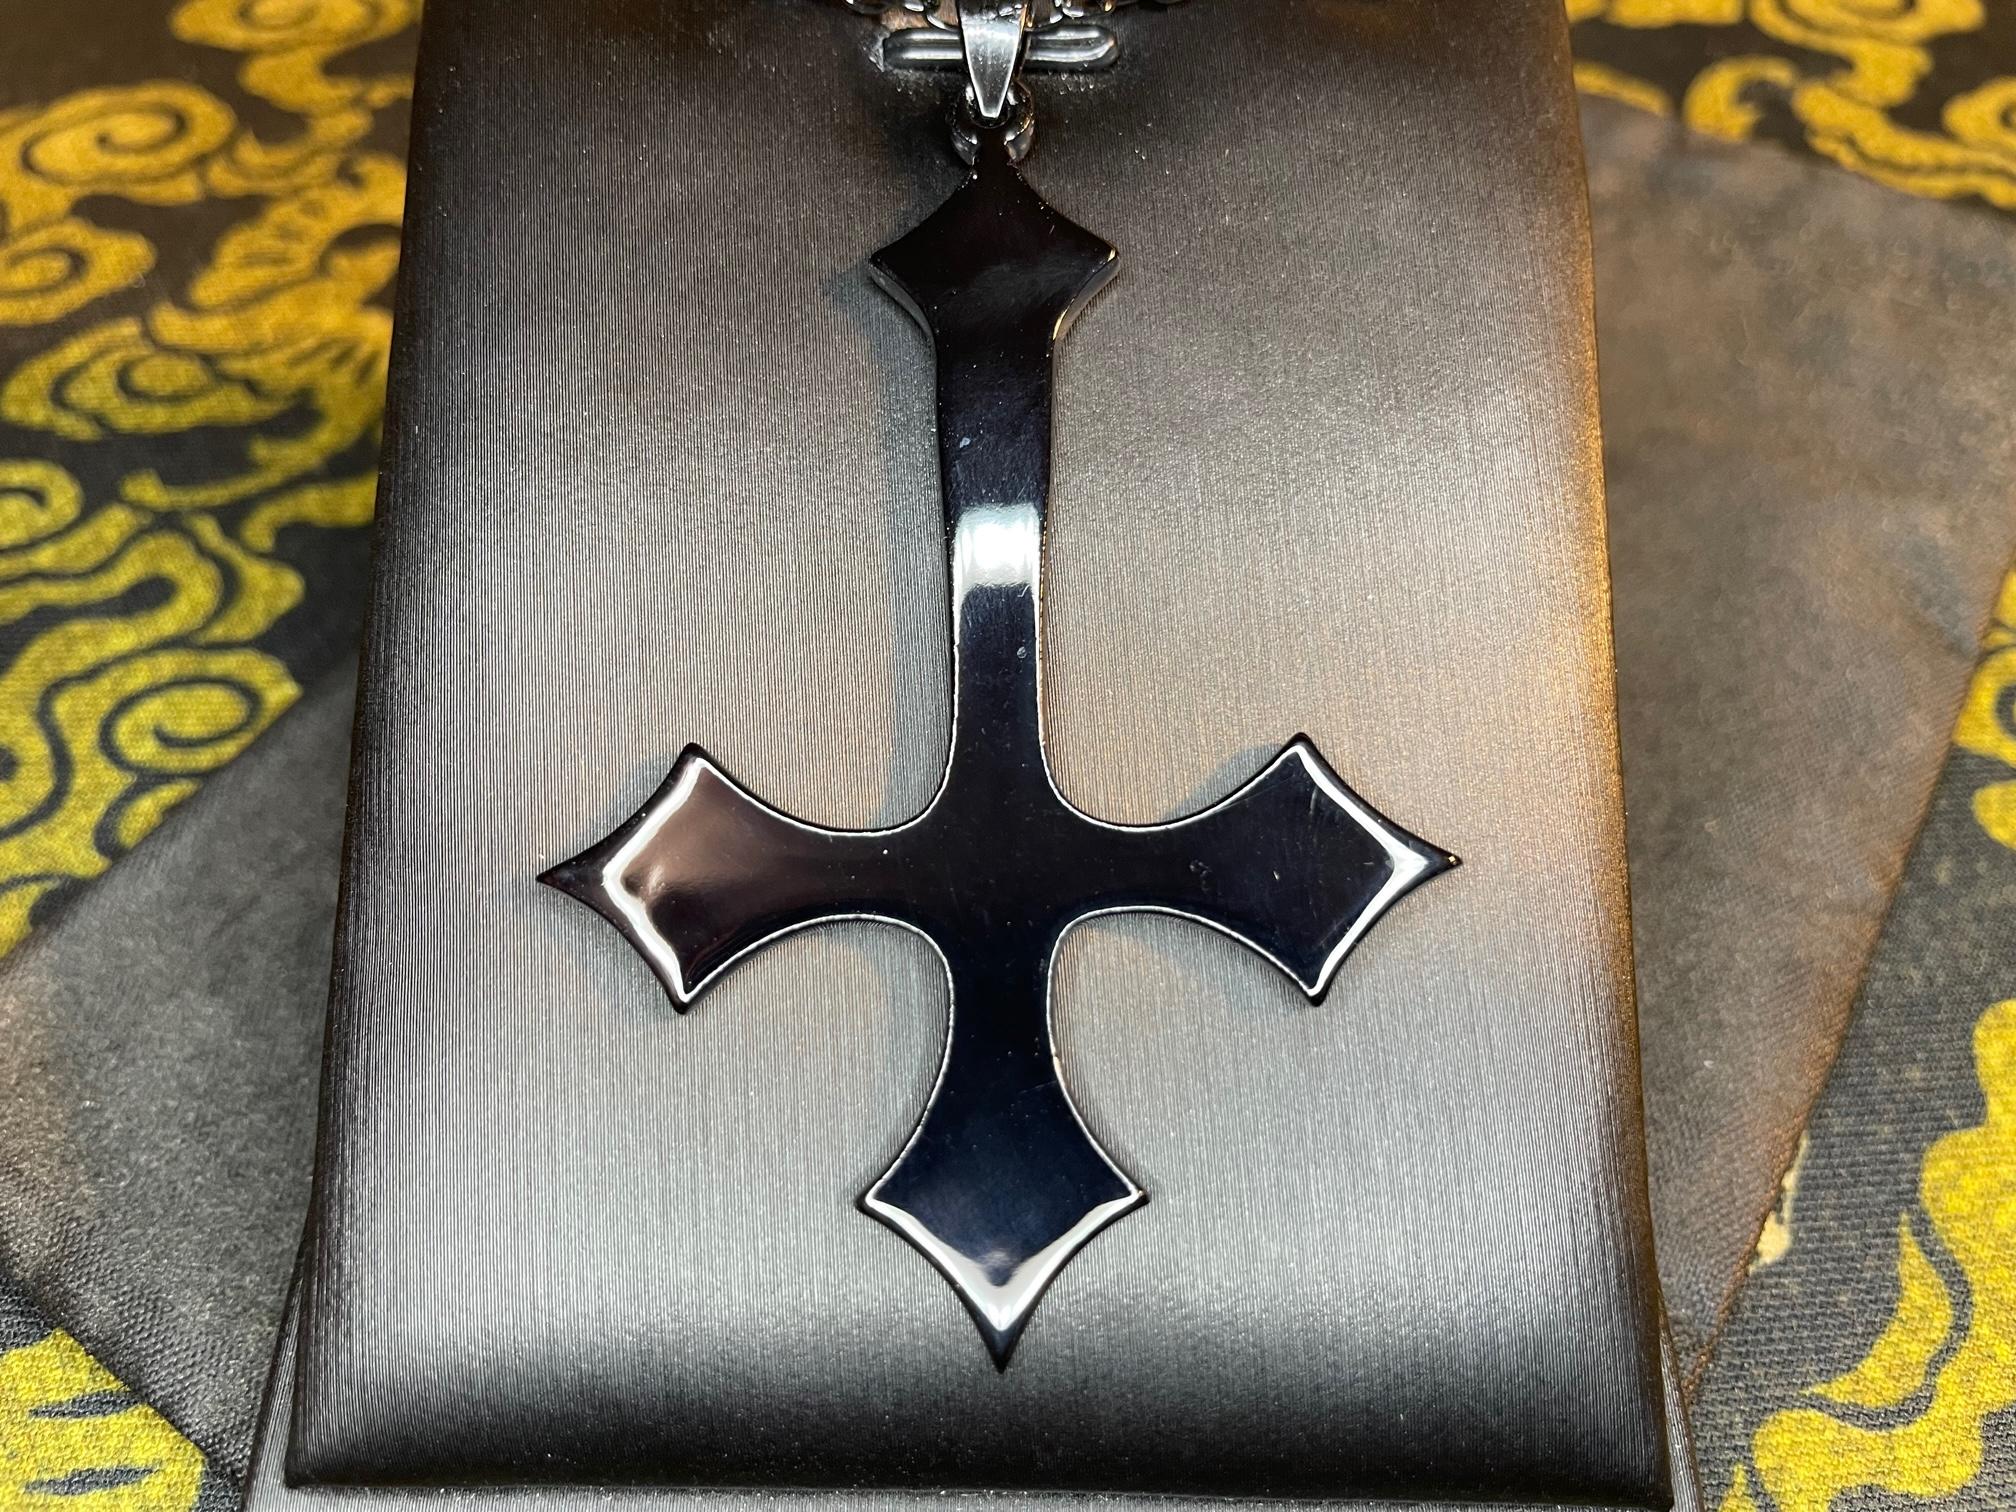 Black Swirled Acrylic Inverted Upside Down Cross Pendant Necklace Vintage Gothic Satanic Pagan Wiccan Druid Occult Darkness Jewelry Black Color